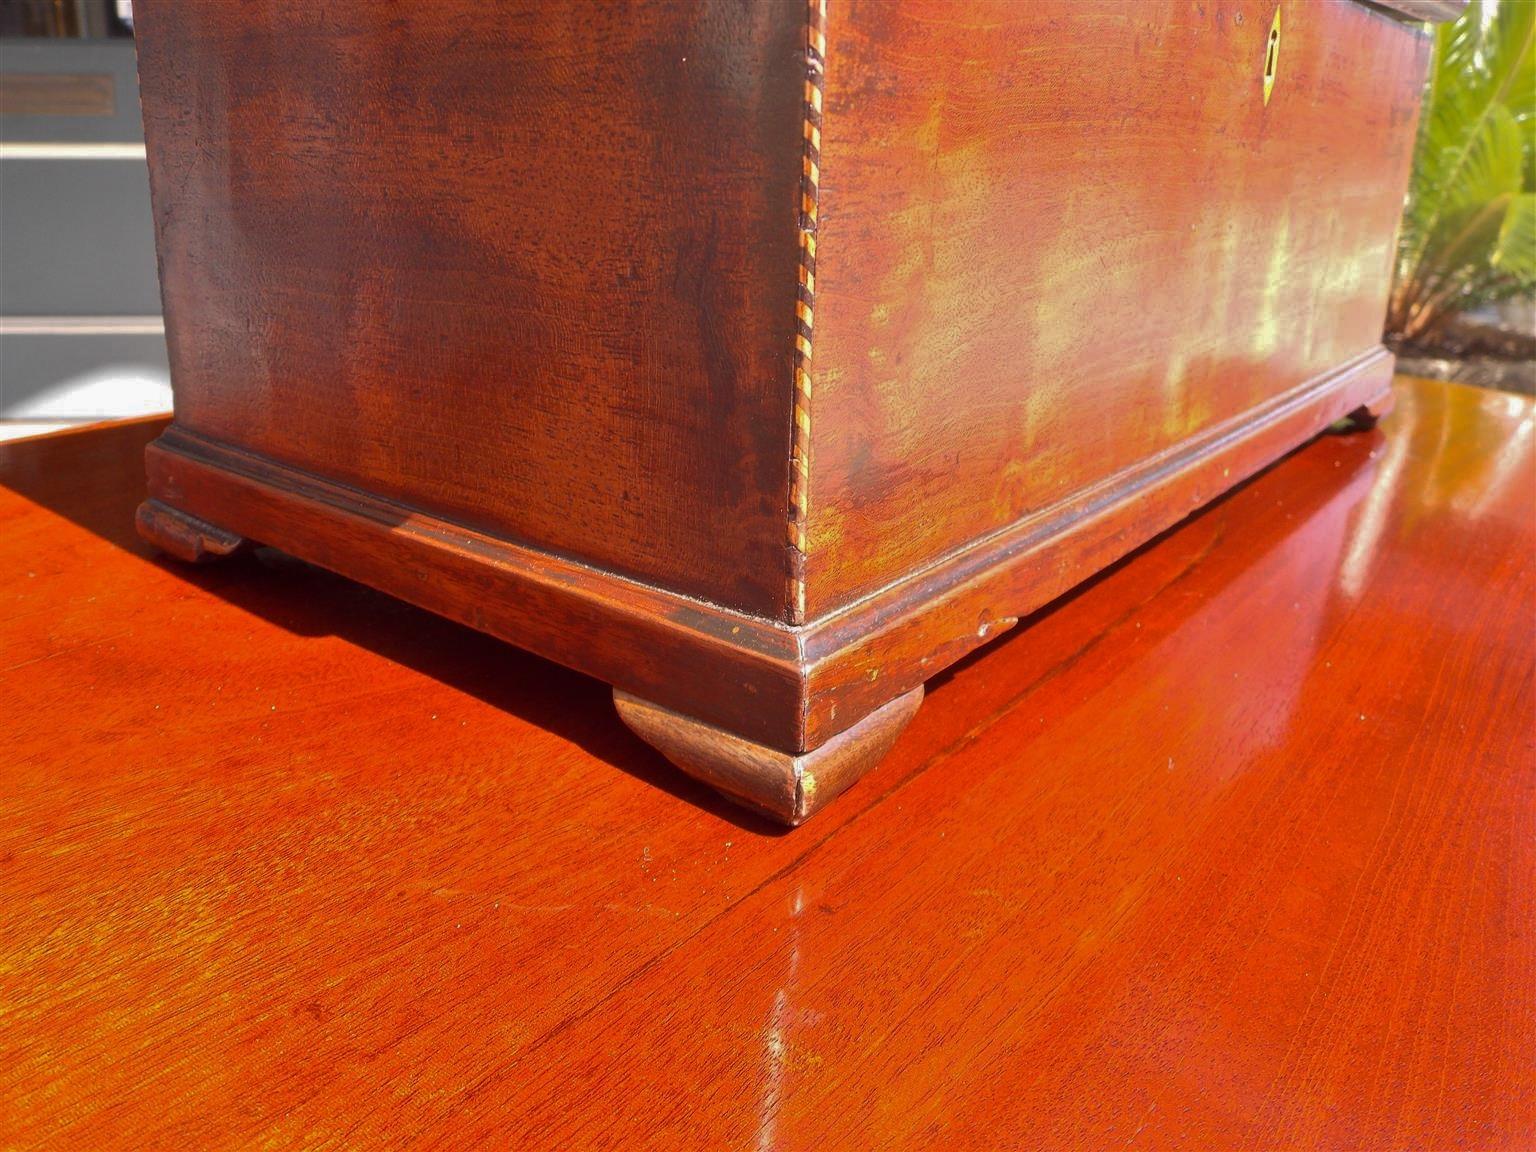 American Walnut Satinwood Inlaid Valuables Box with Original Feet, Circa 1780 For Sale 5